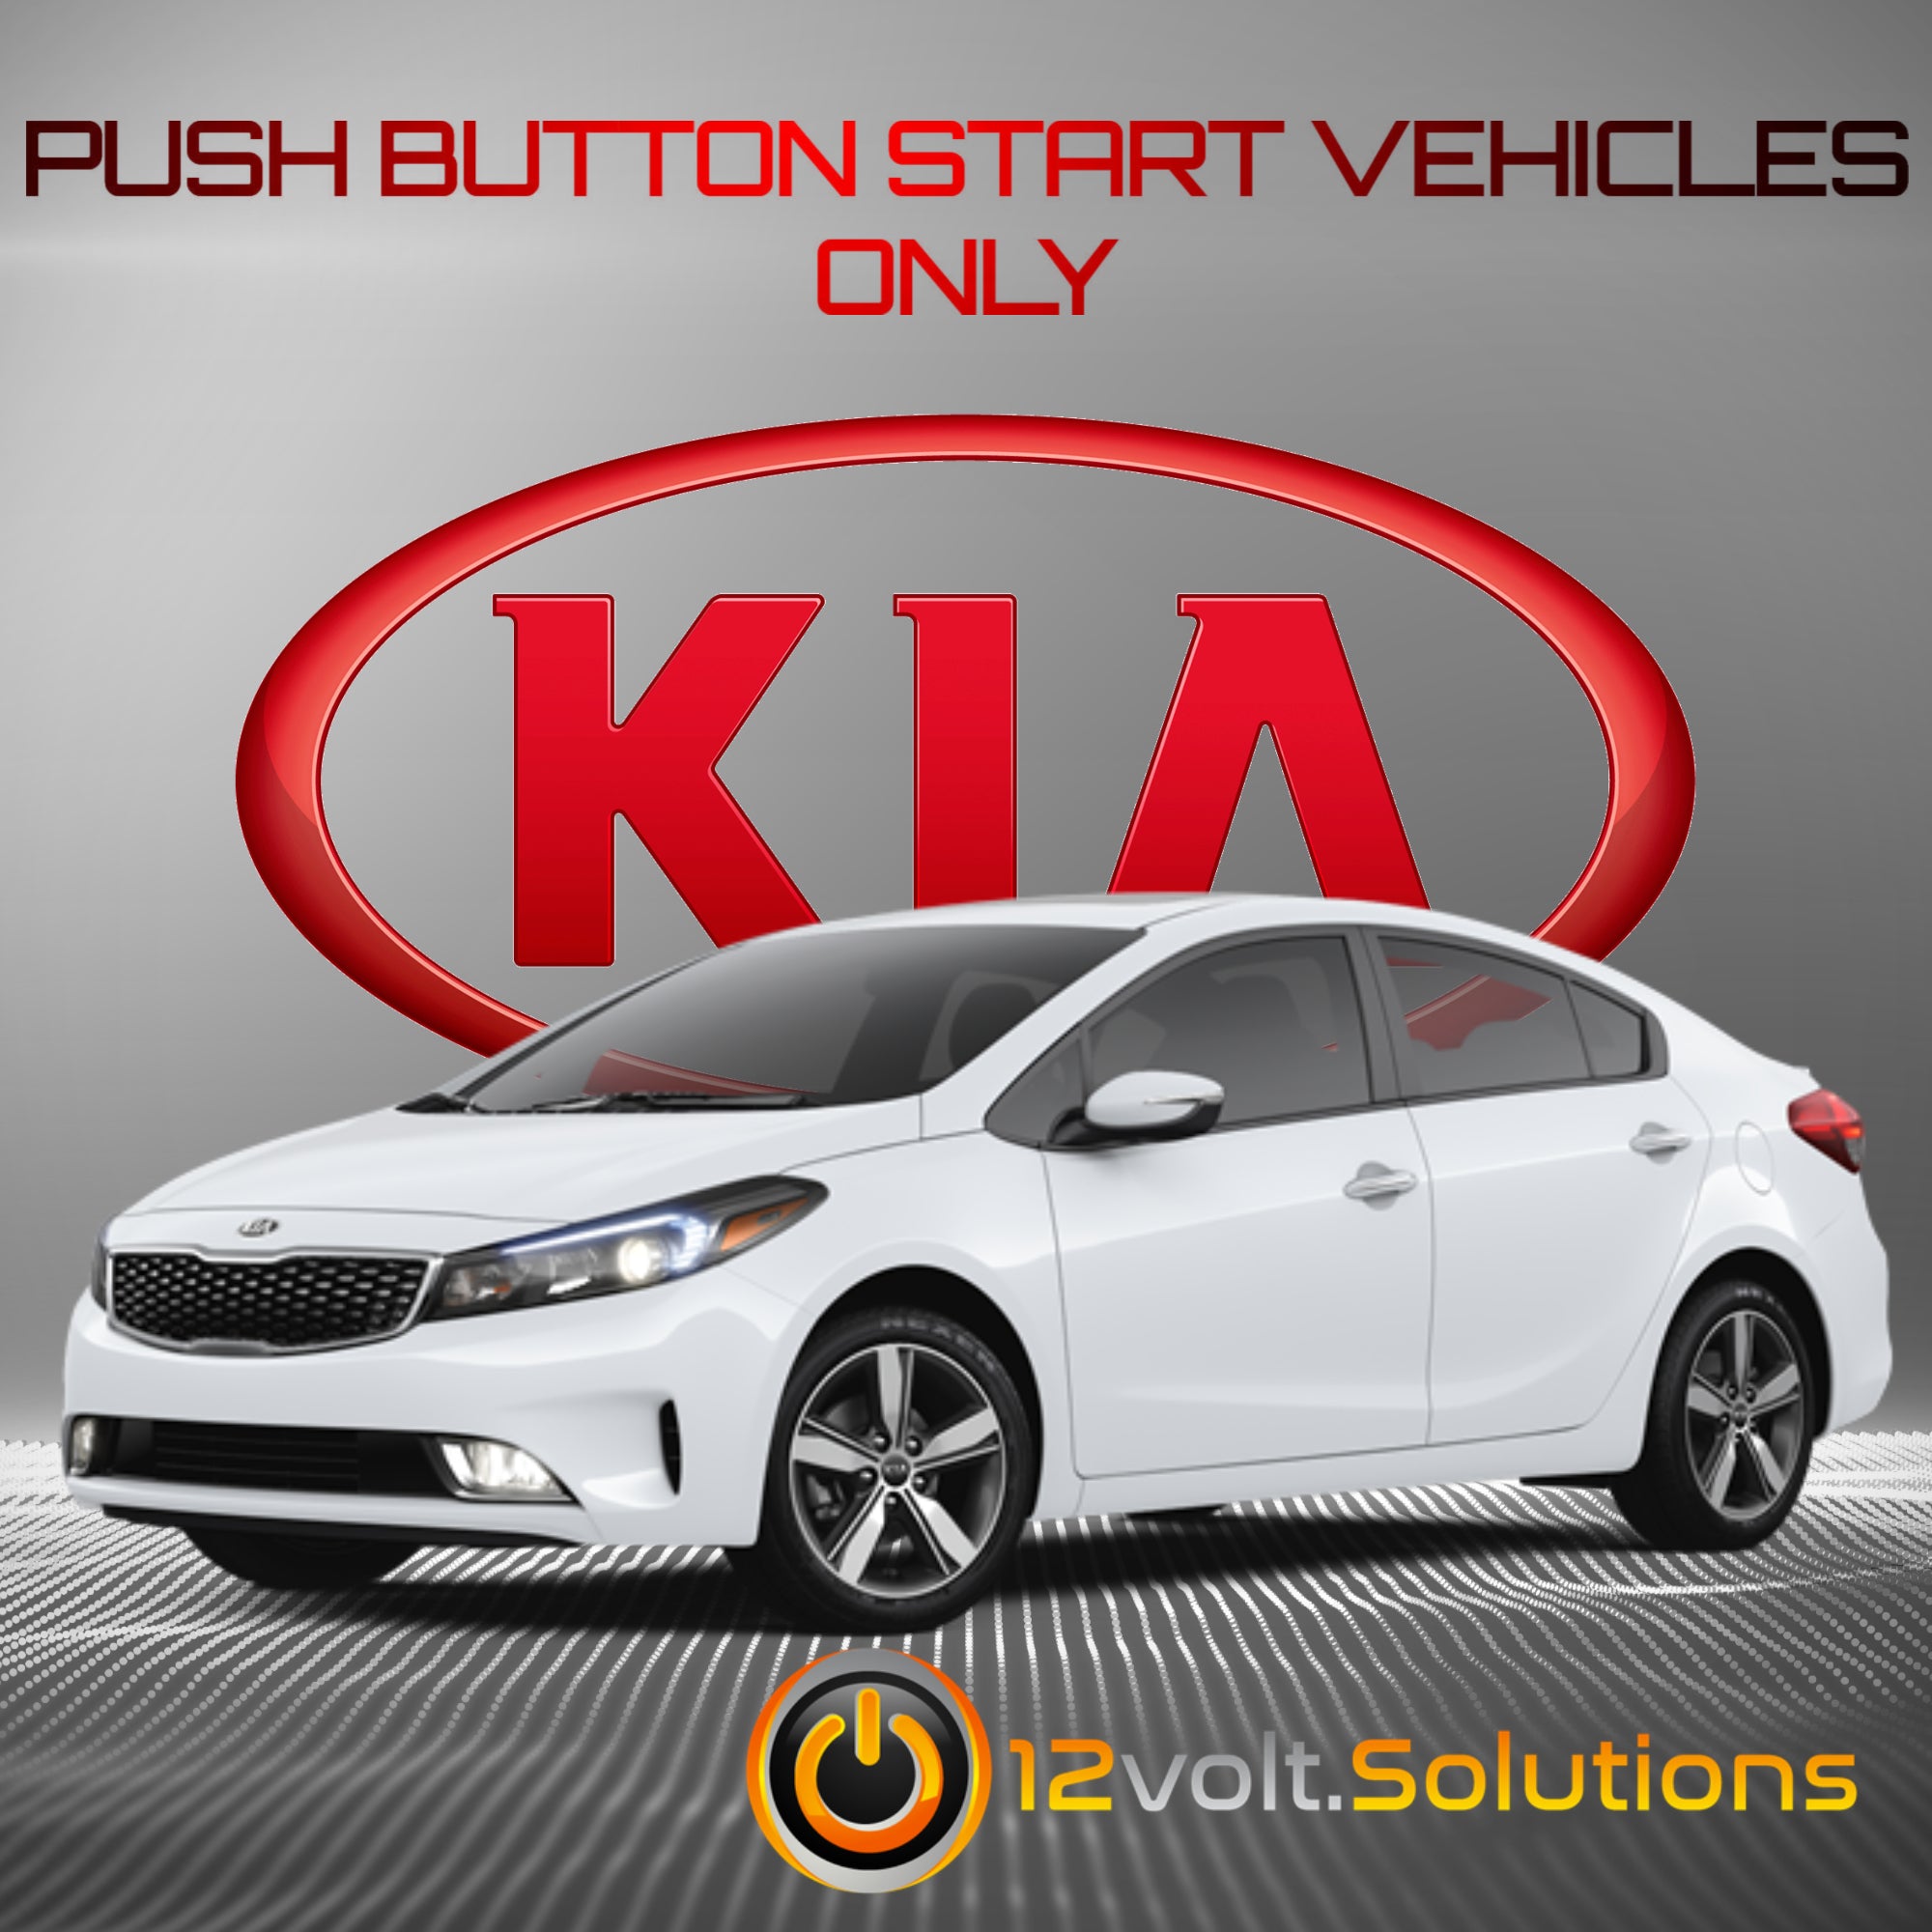 2017-2018 Kia Forte Remote Start Plug and Play Kit (Push Button Start)-12Volt.Solutions